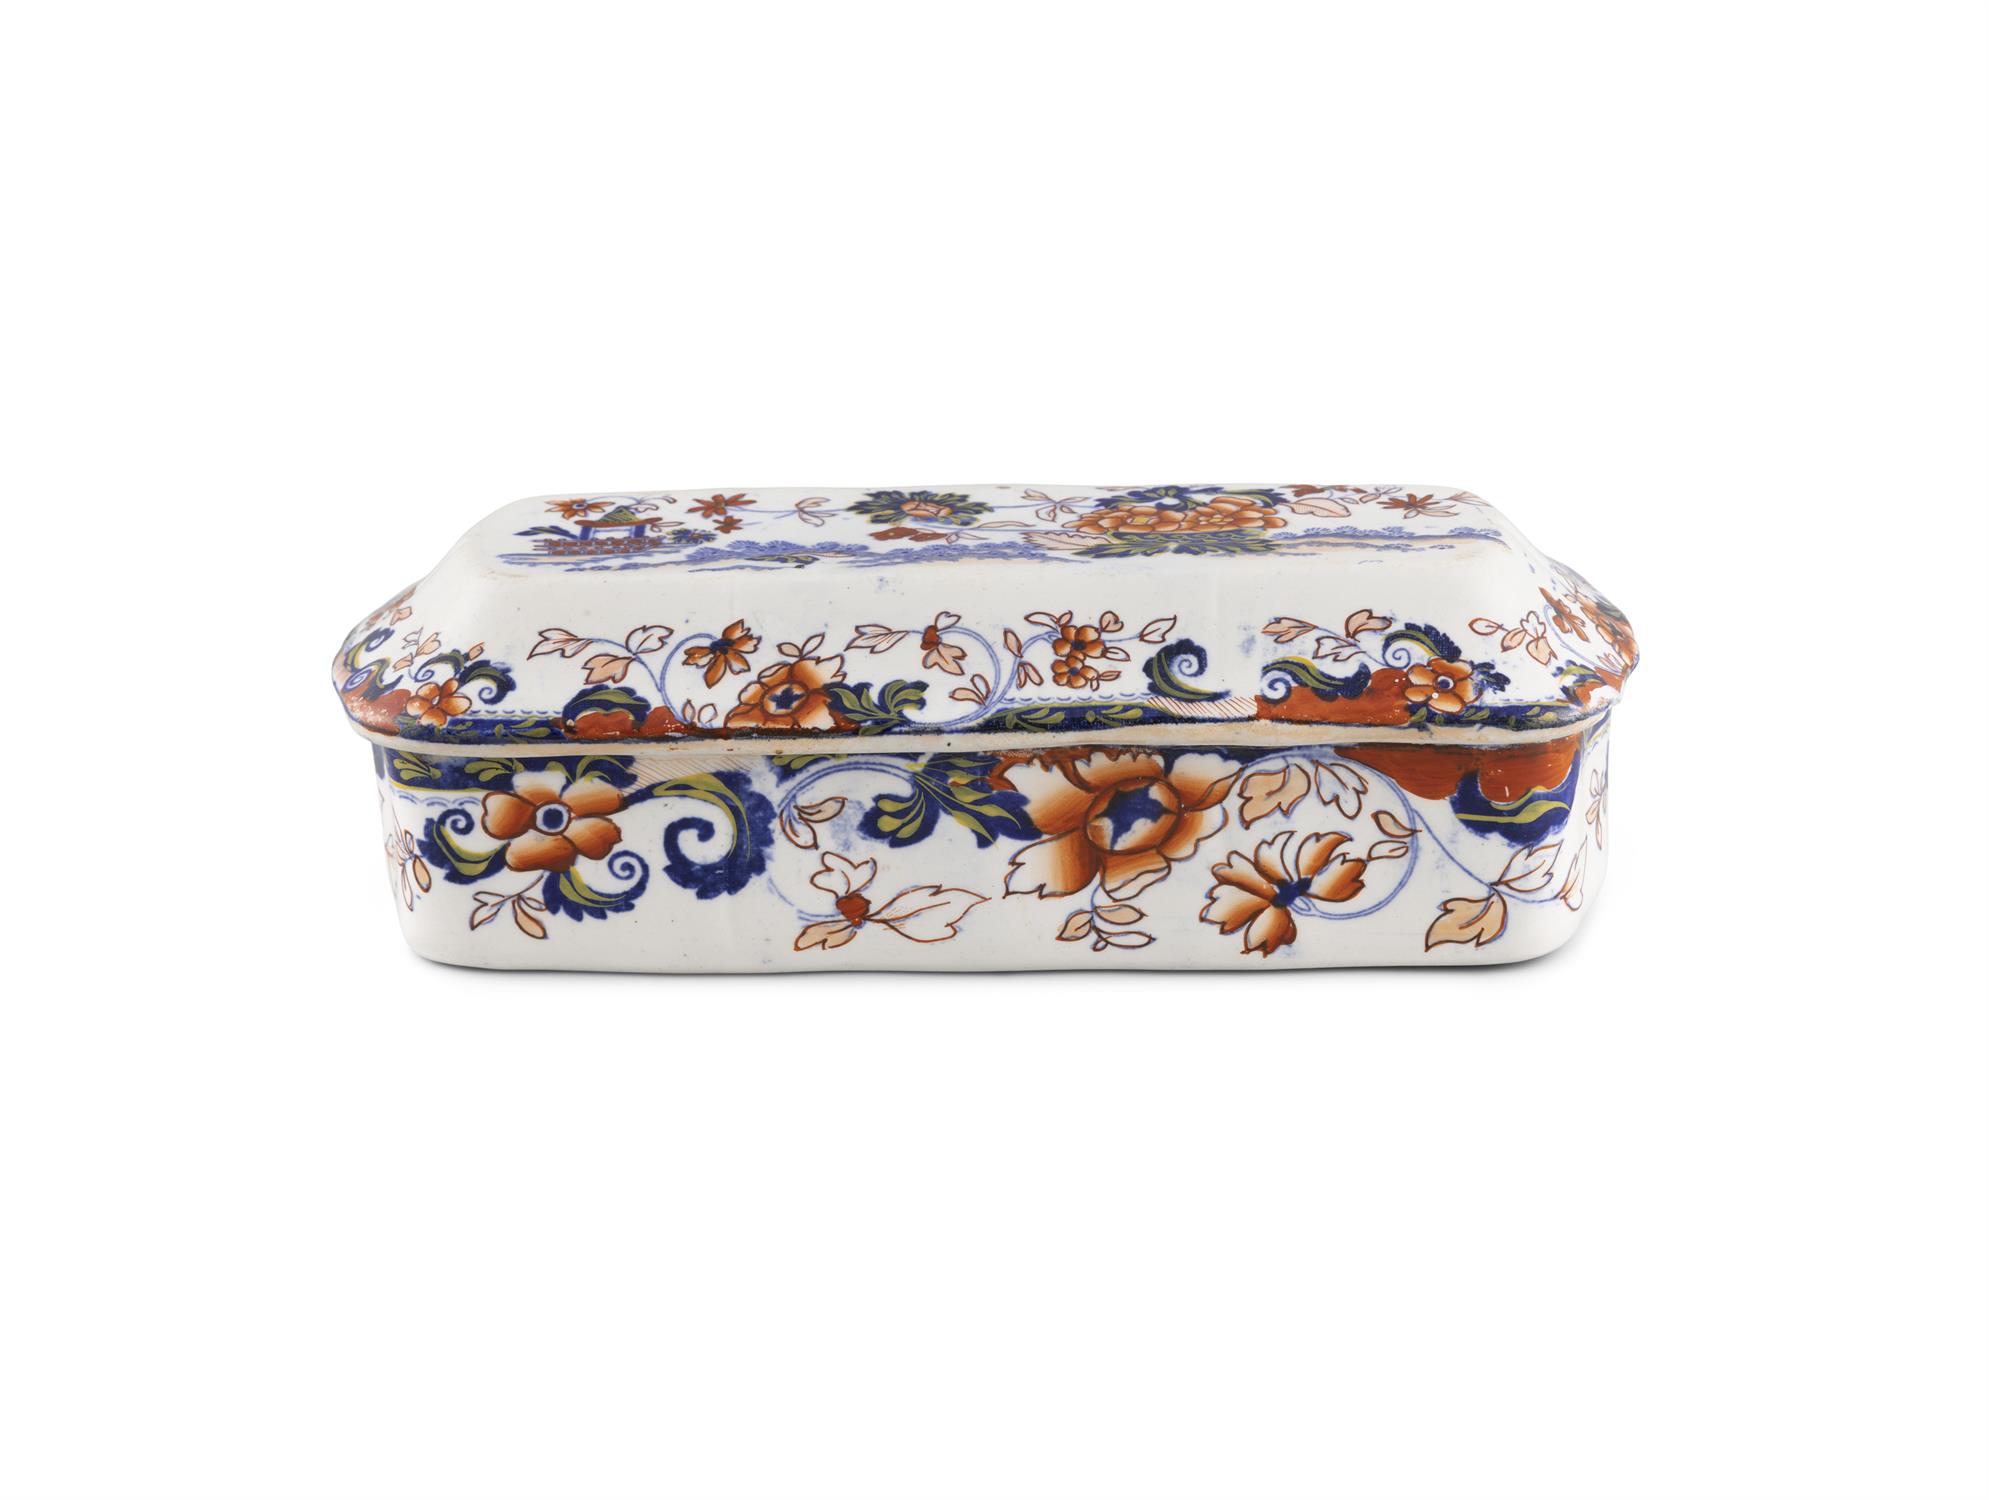 AN 'AMHERST JAPAN' PATTERN STONE CHINA BRUSH BOX printed in underglaze blue and enamelled in red